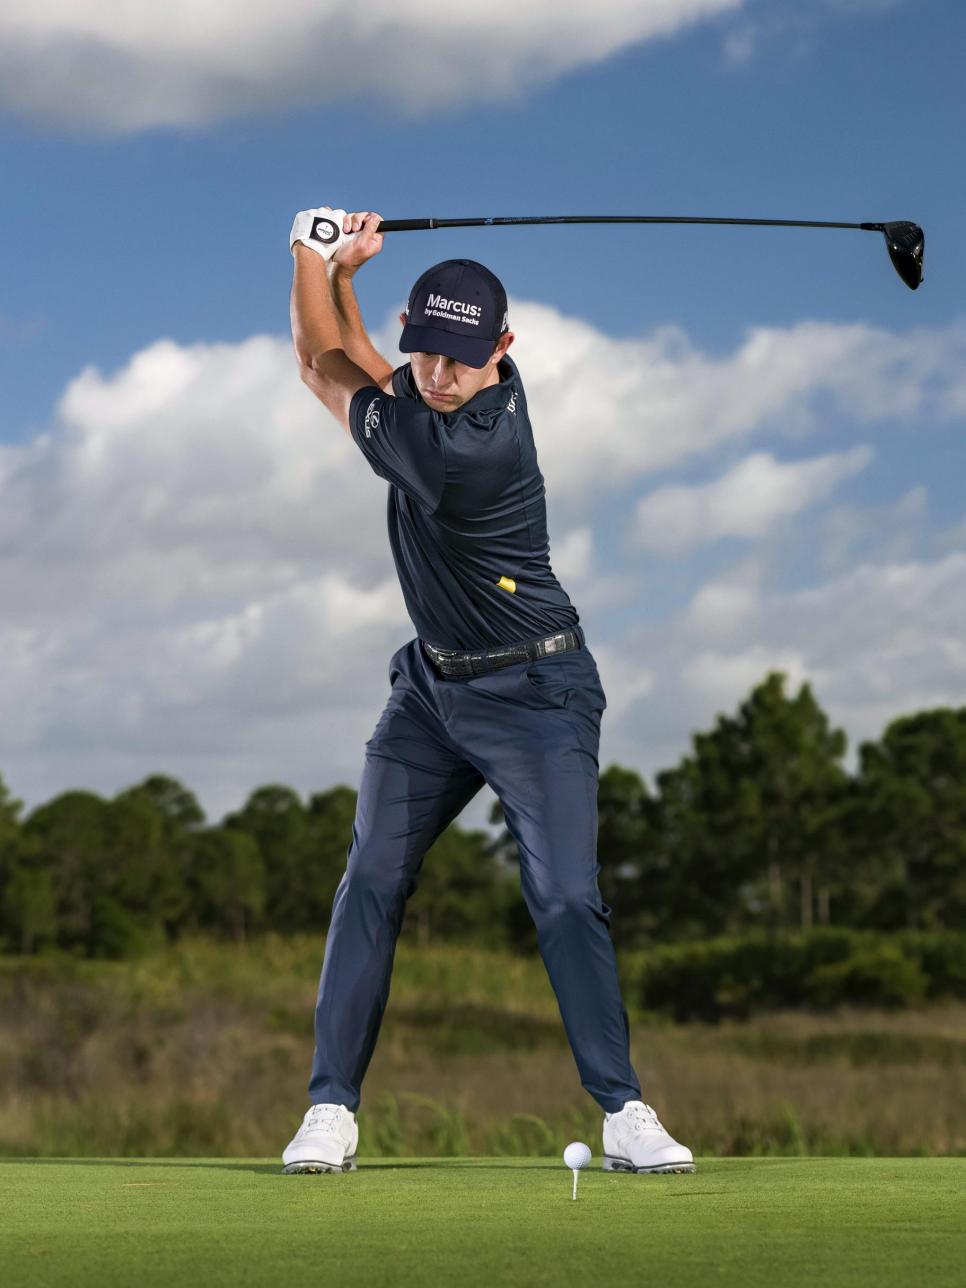 /content/dam/images/golfdigest/fullset/2021/7/patrick-cantlay-tips/Cantlay1.jpeg